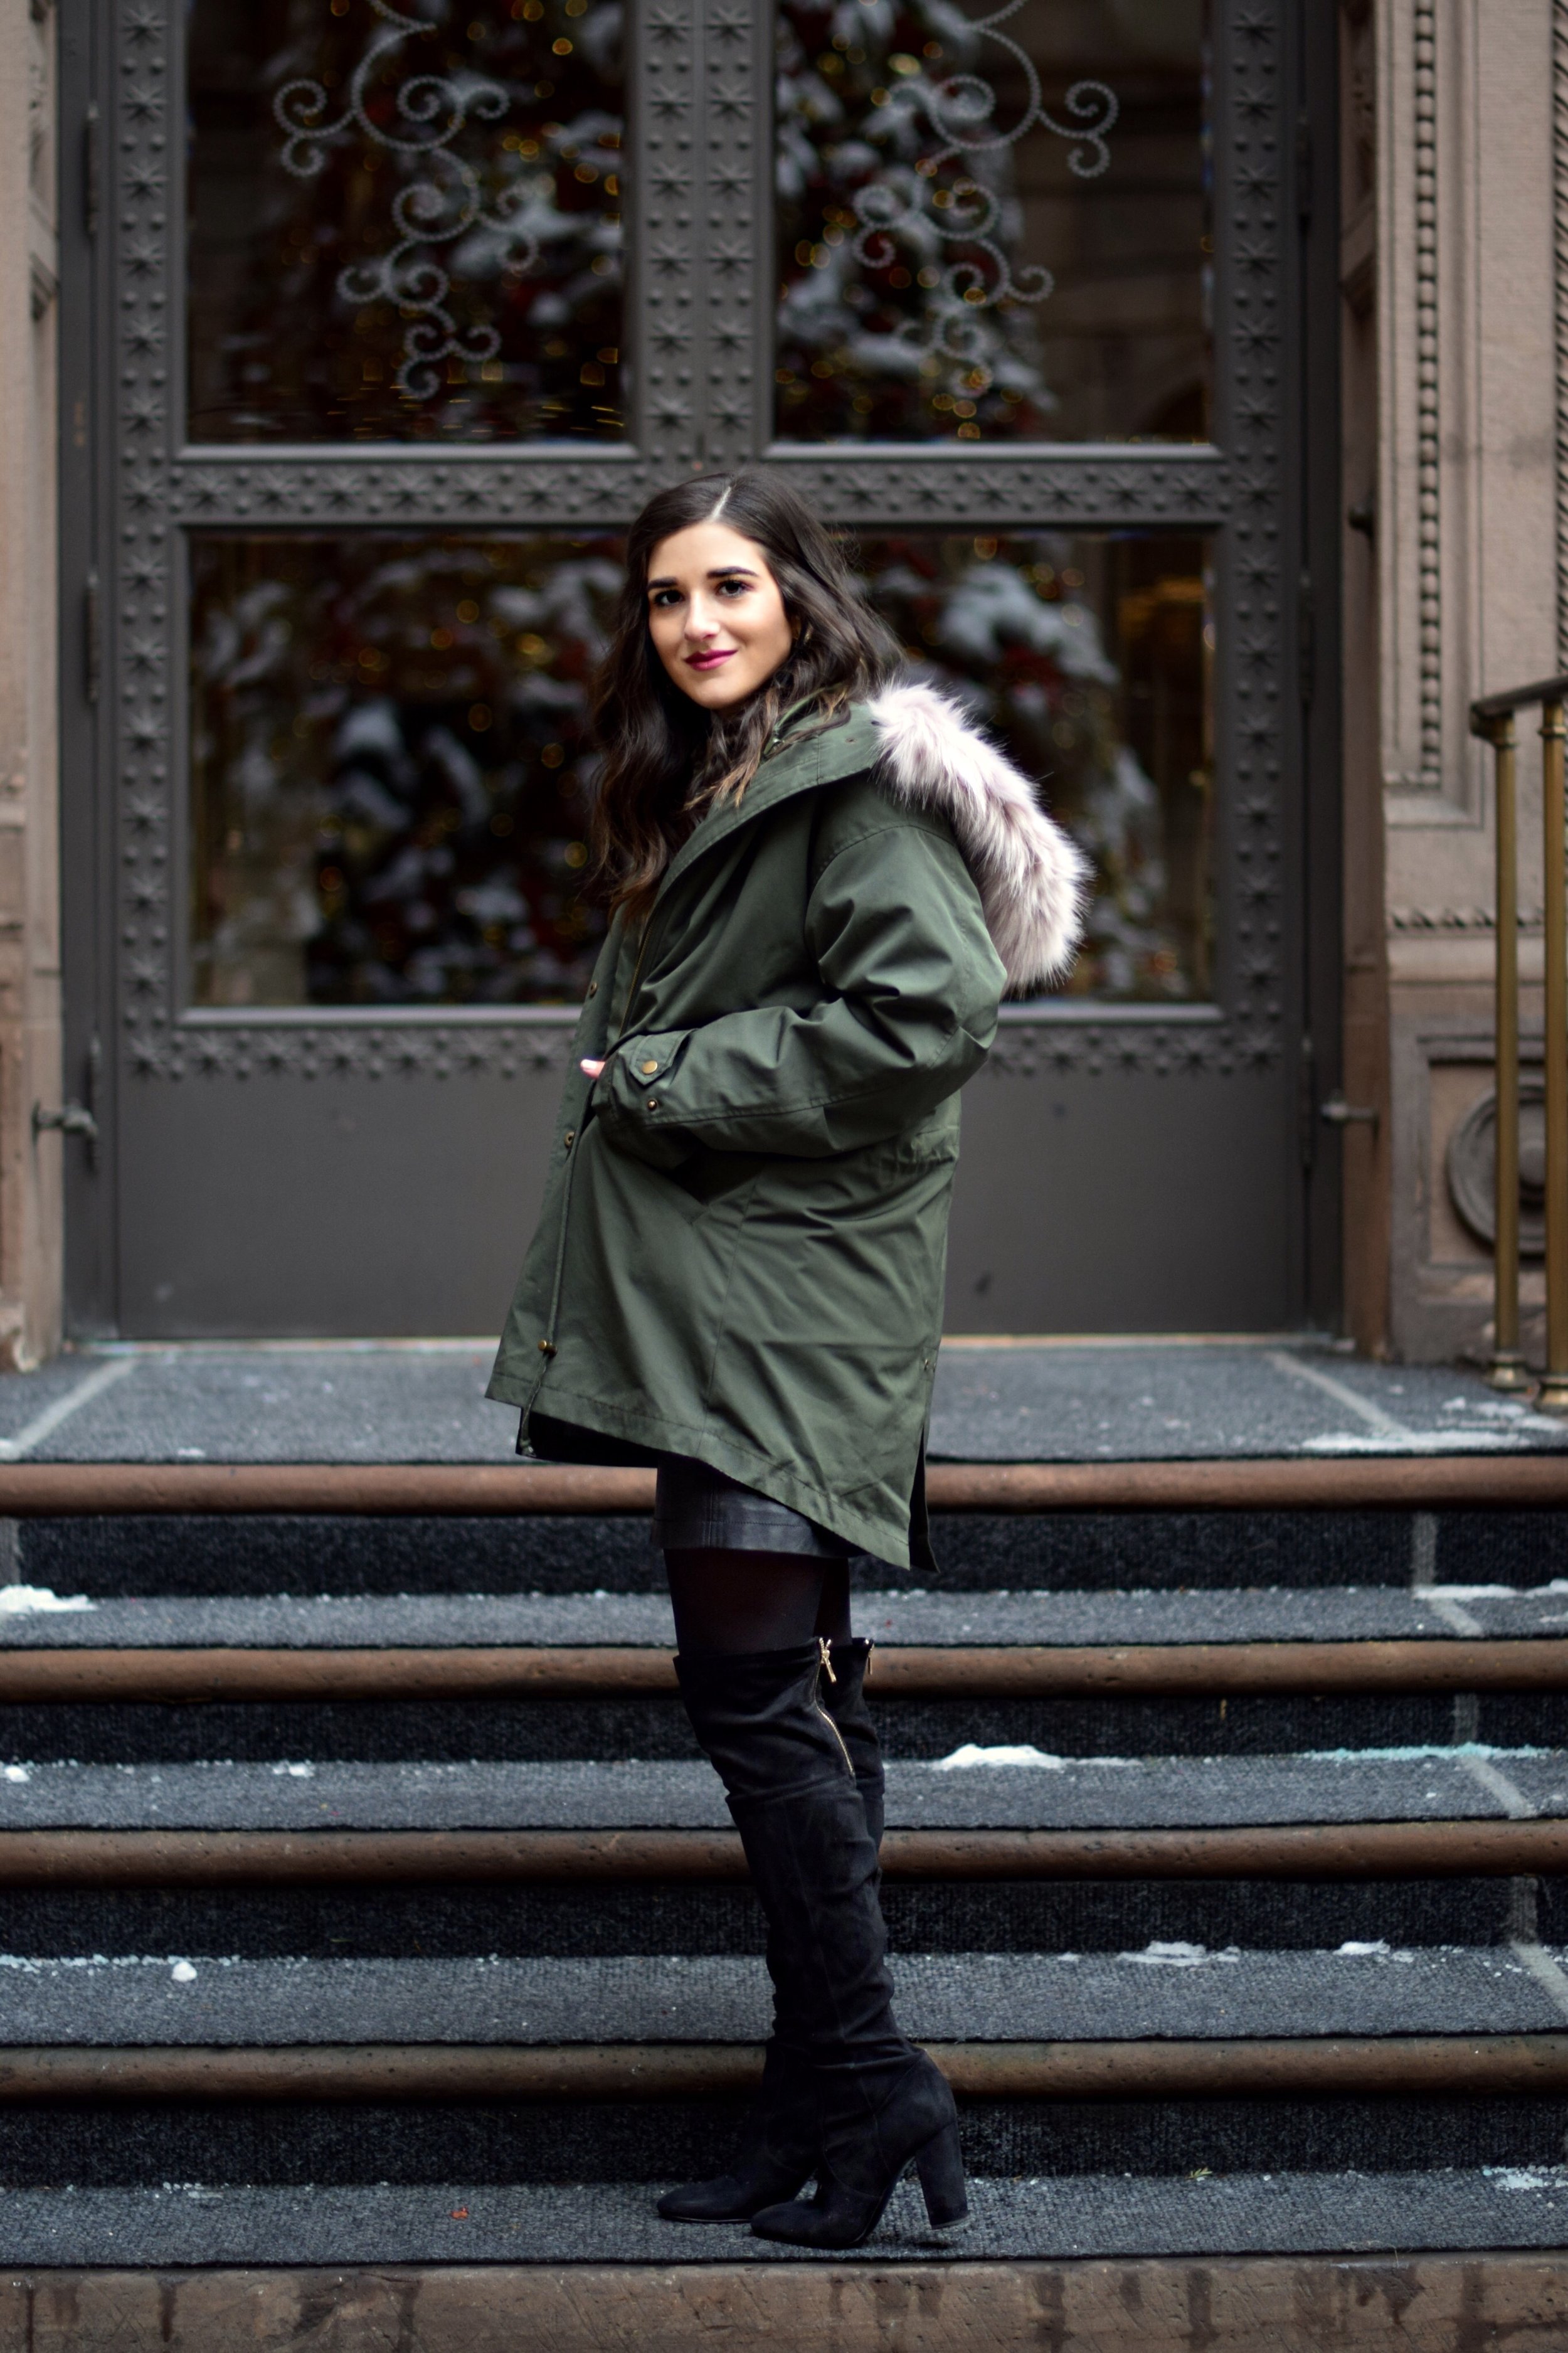 The Perfect Parka 10 Coats To Gift This Season Esther Santer Fashion Blog NYC Street Style Blogger Outfit OOTD Trendy Urban Outfitters Jacket Coat Girl Women Fur Hood Winter Black OTK Boots Cashmere Sweater Shoes Shopping Cold Weather Holiday Presents.jpg